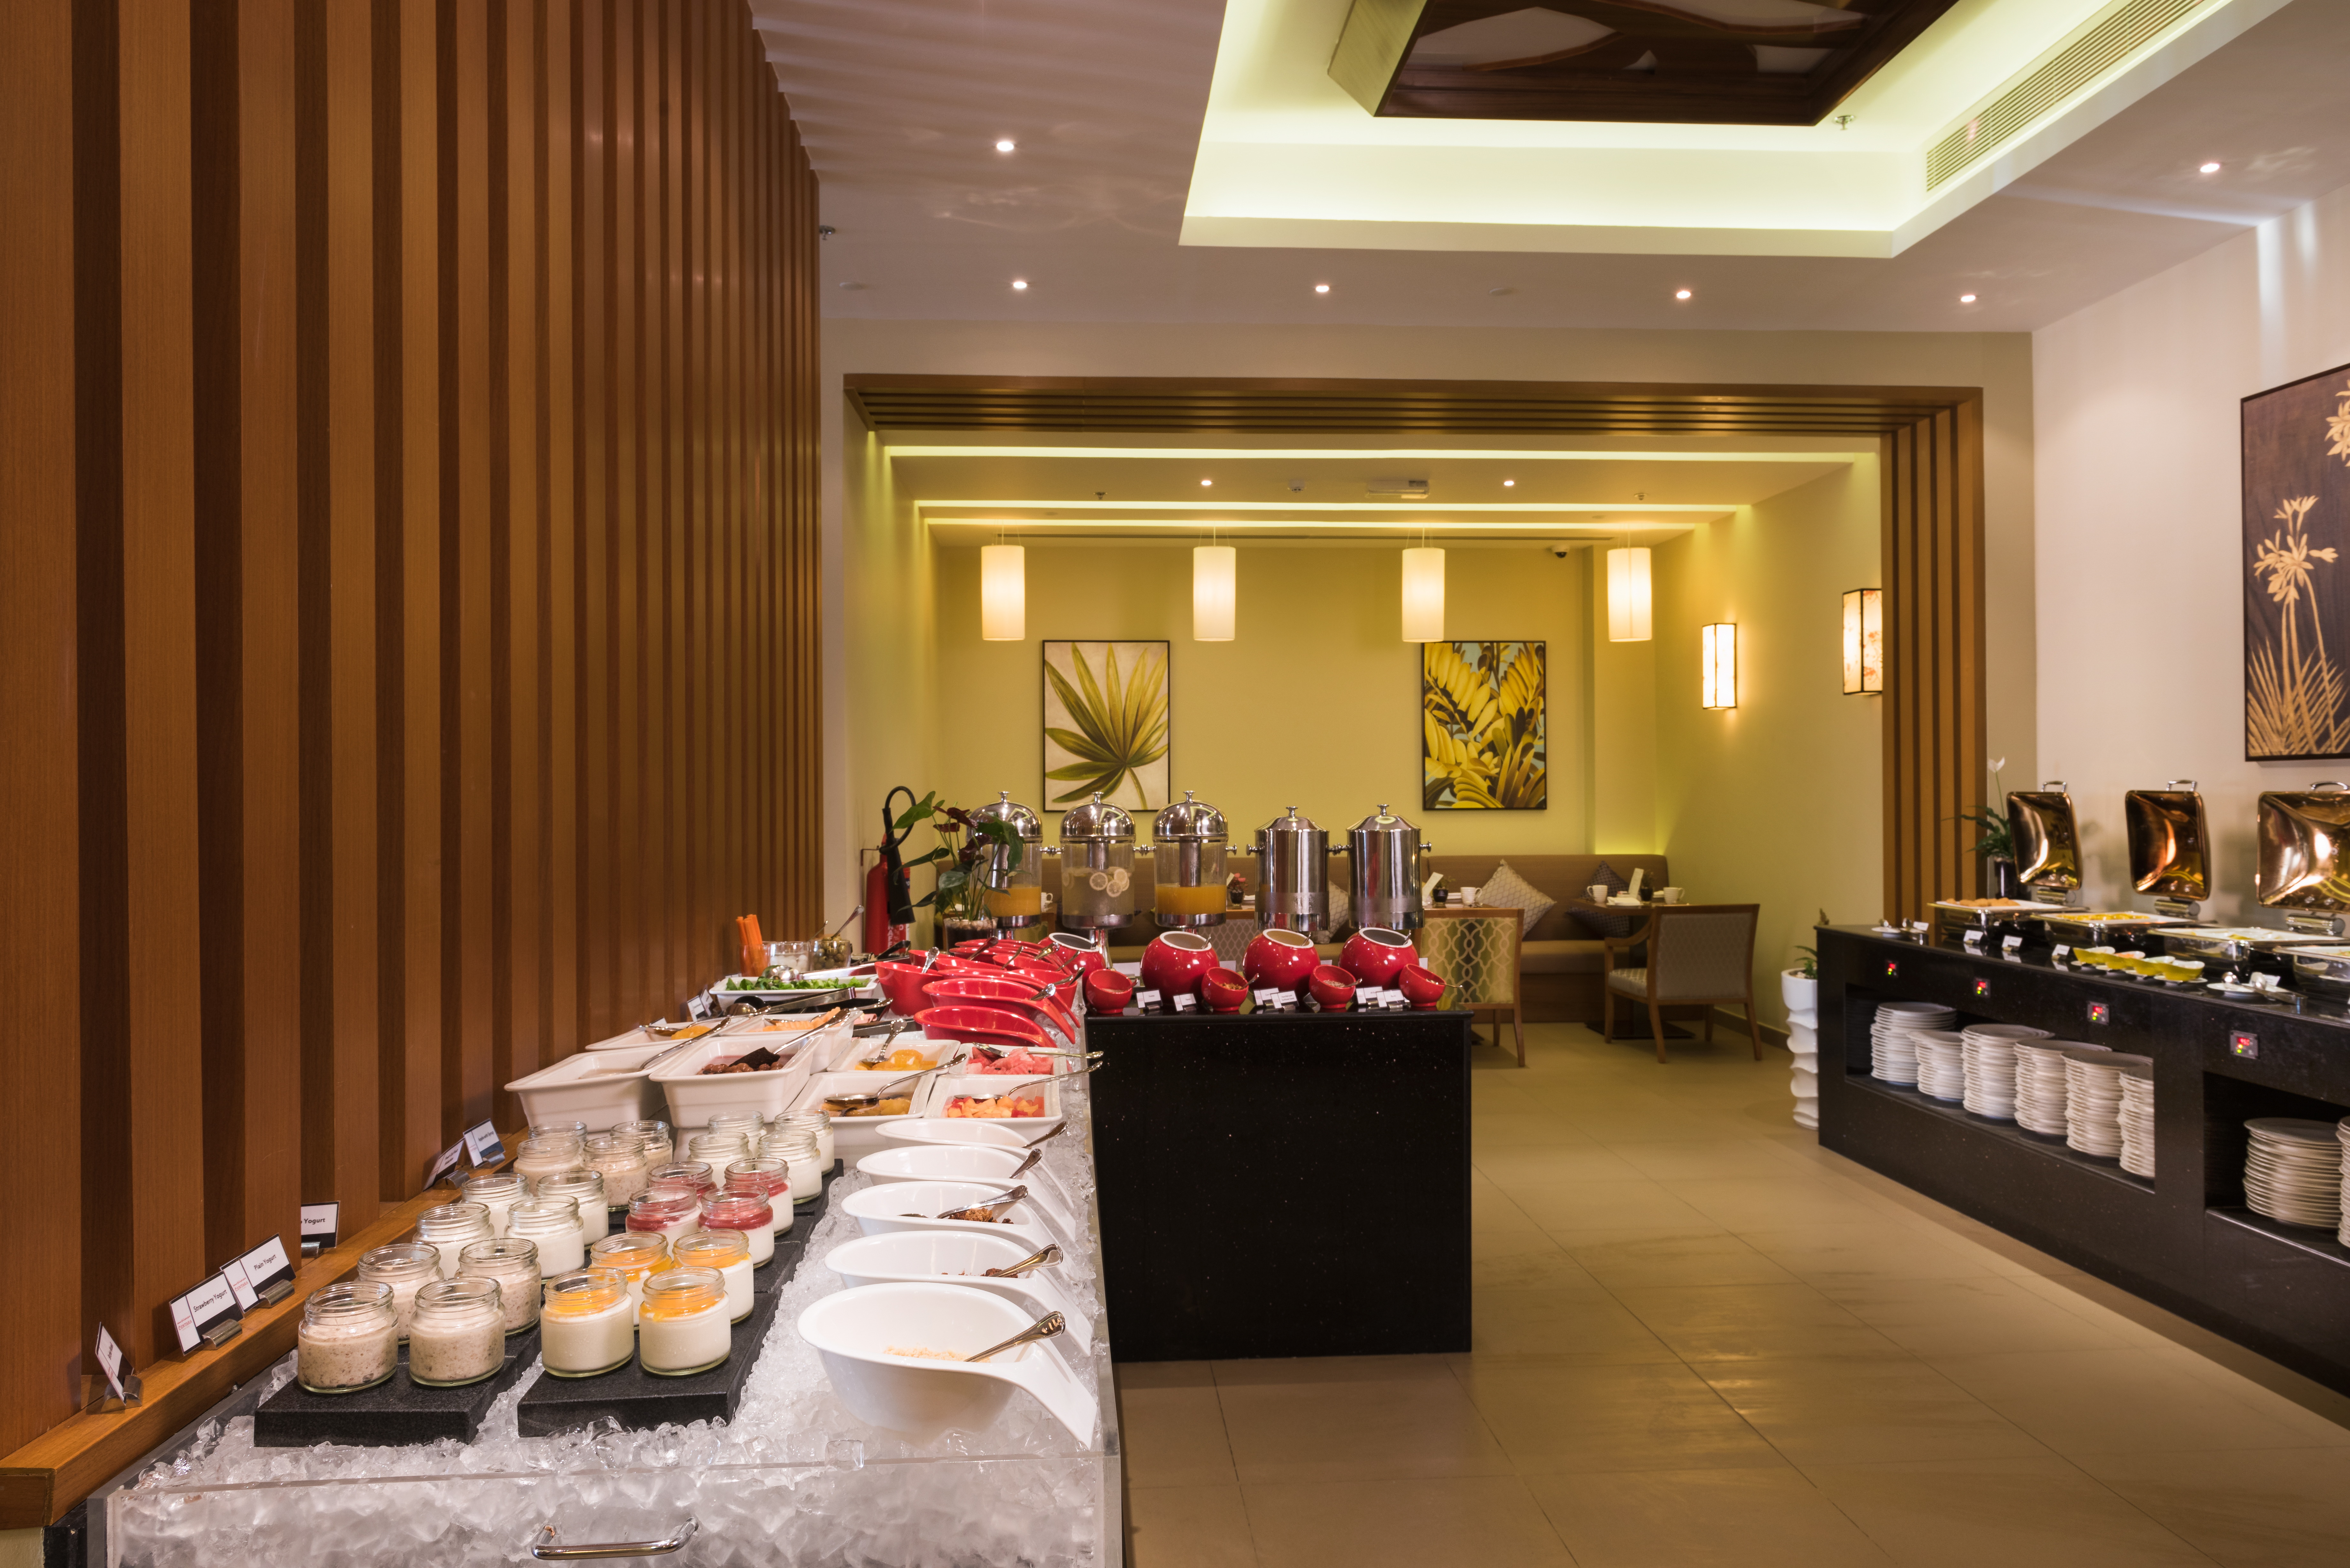 Weekend escape: Stay at Centara Muscat Hotel